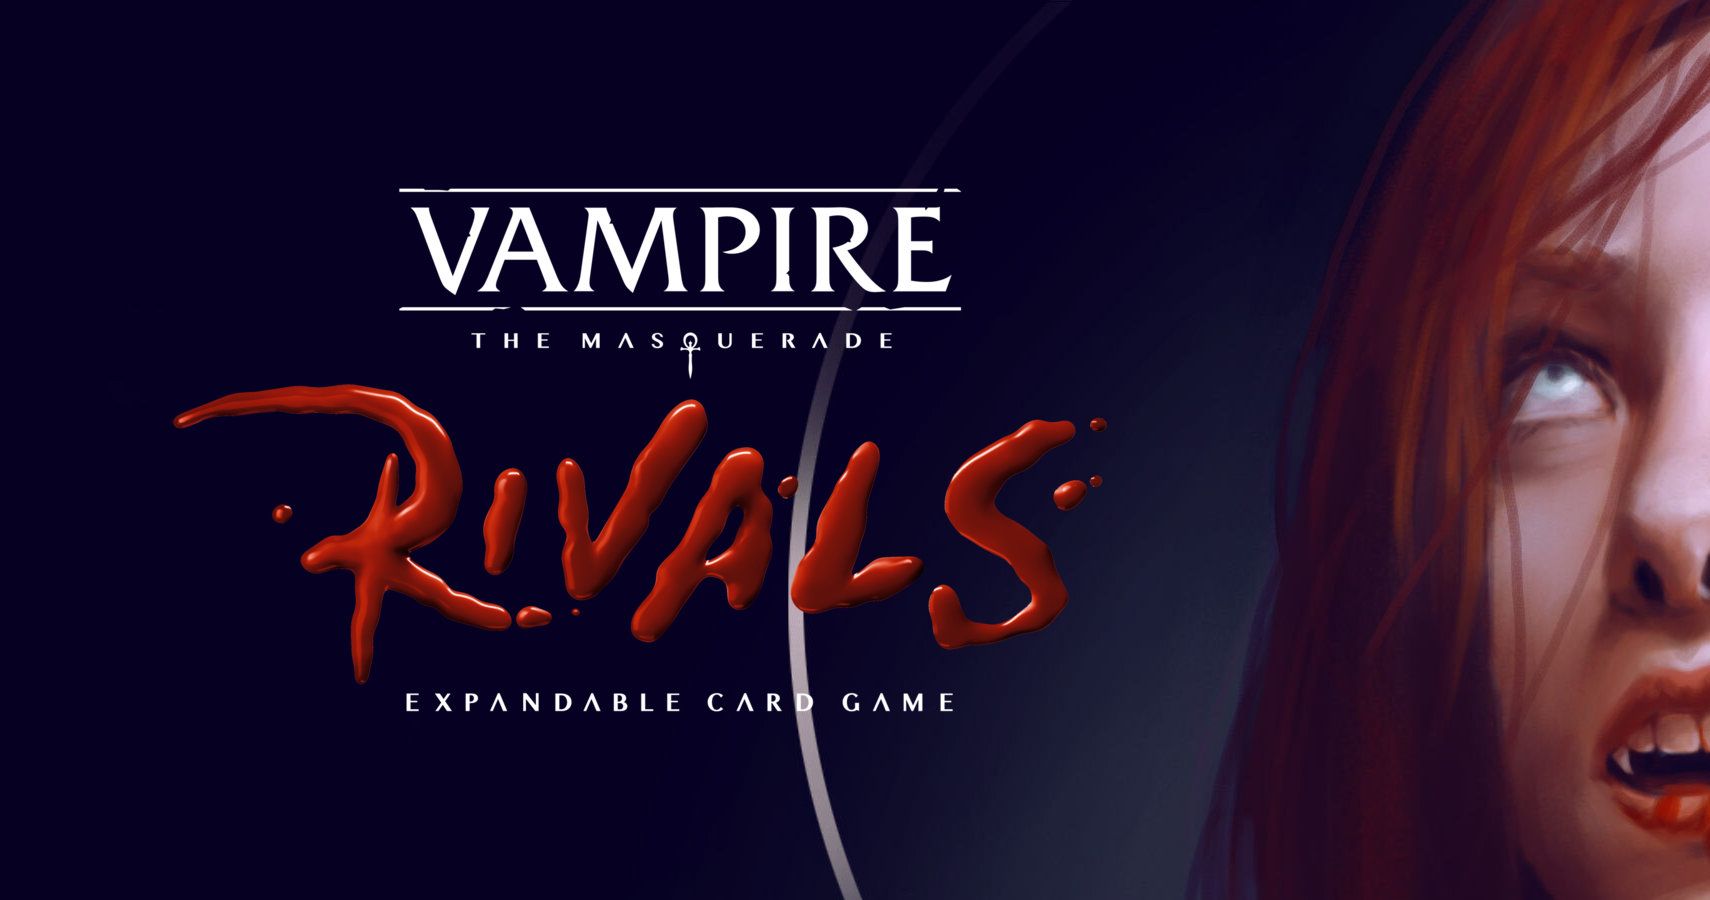 Vampire The Masquerade Rivals  Card Game Coming To Kickstarter August 4th